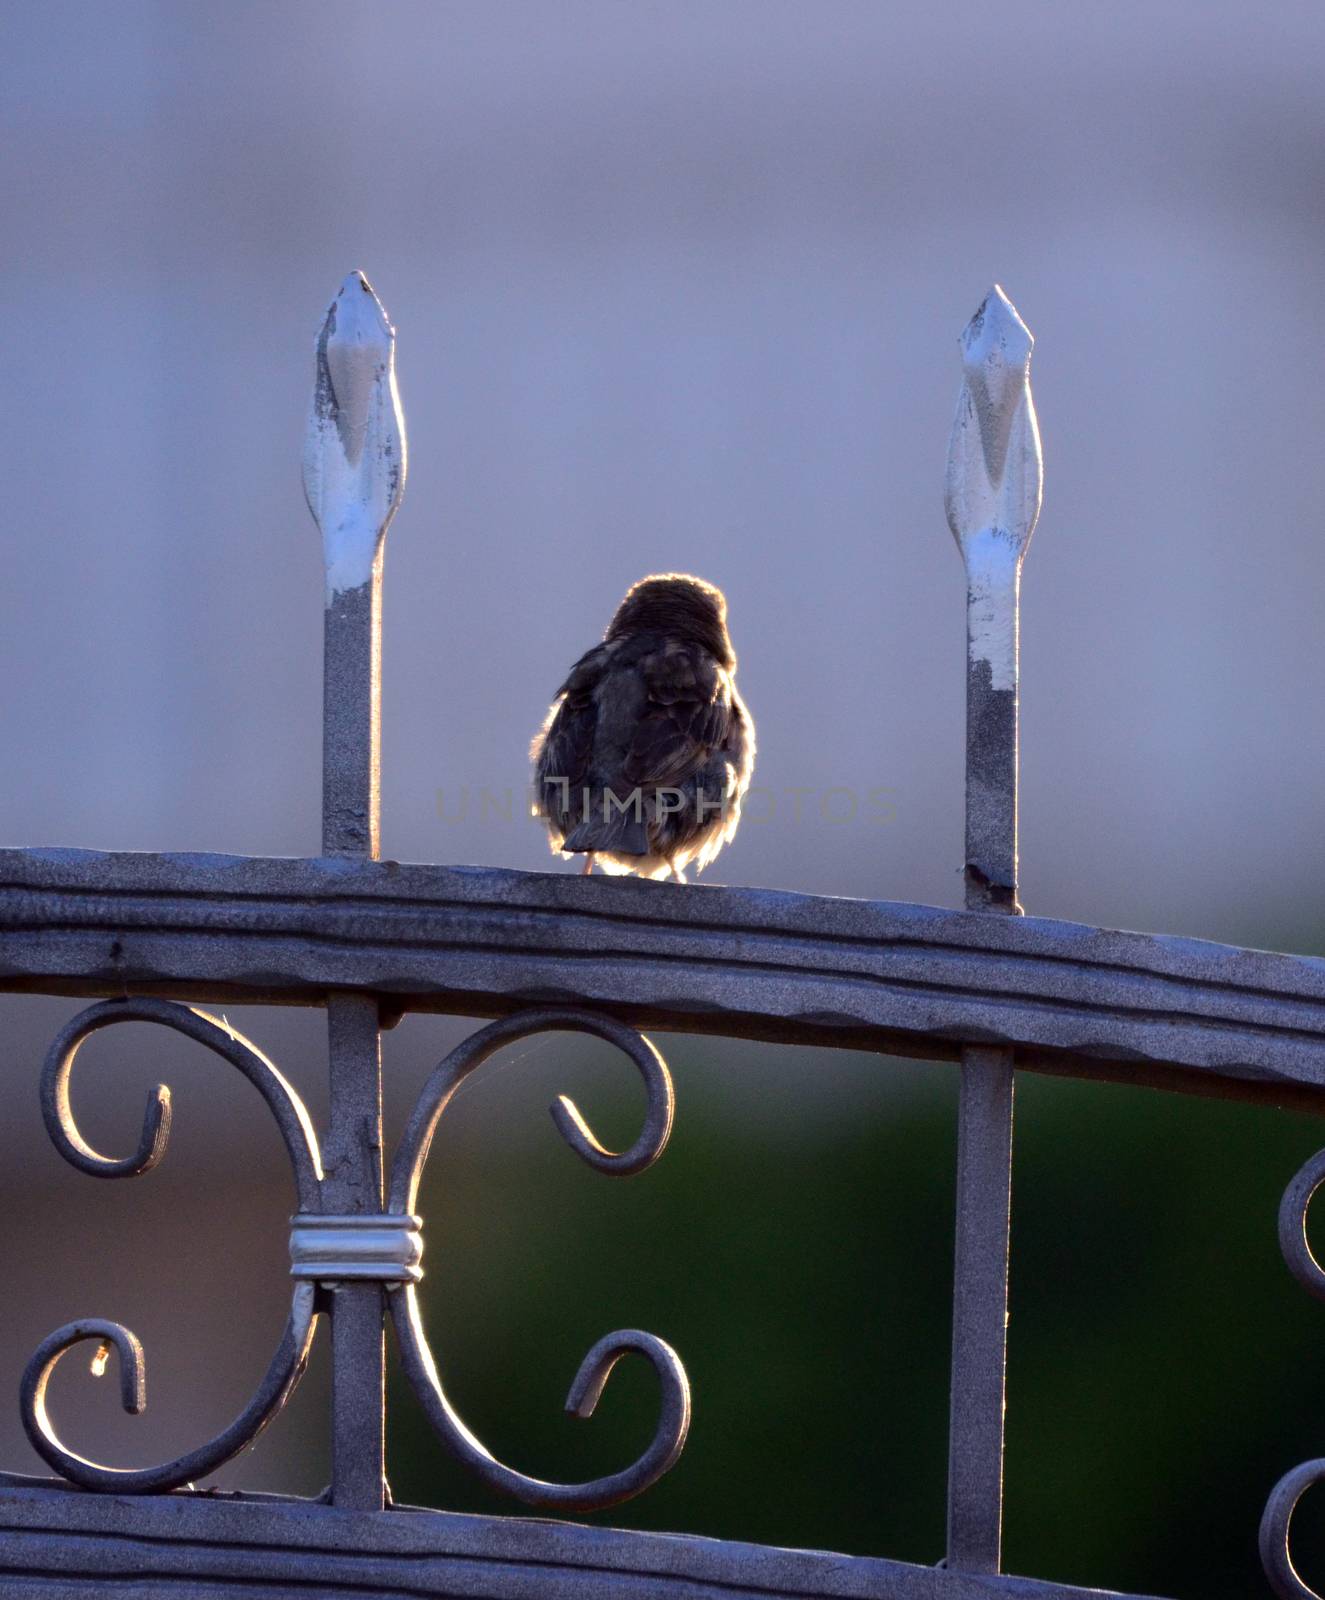 picture of a House sparrow in the morning sun